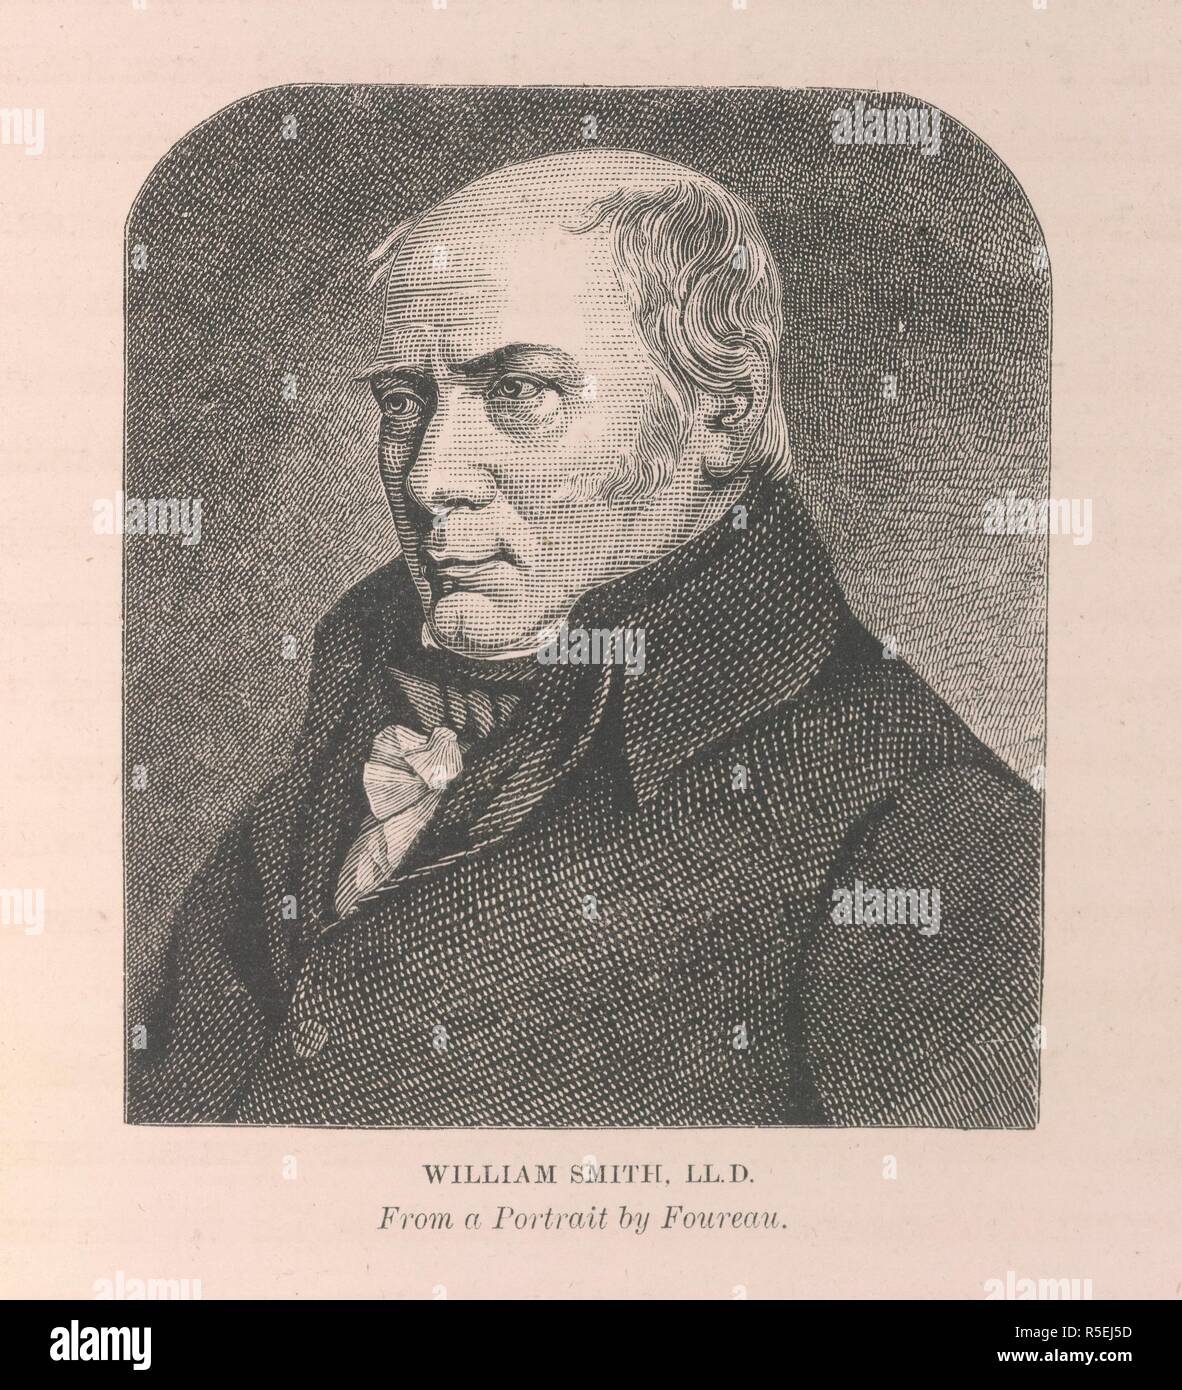 Willliam Smith, LL.D. Life of Sir R. I. Murchison ... with notices of hi. London, 1875. Willliam Smith (1769-1839). English civil engineer and geologist. Portrait.  Image taken from Life of Sir R. I. Murchison with notices of his scientific contemporaries and a sketch of the rise and growth of palÃ¦ozoic geology in Britain..  Originally published/produced in London, 1875. . Source: 10825.dd.14 volume 1, opposite 190. Language: English. Stock Photo